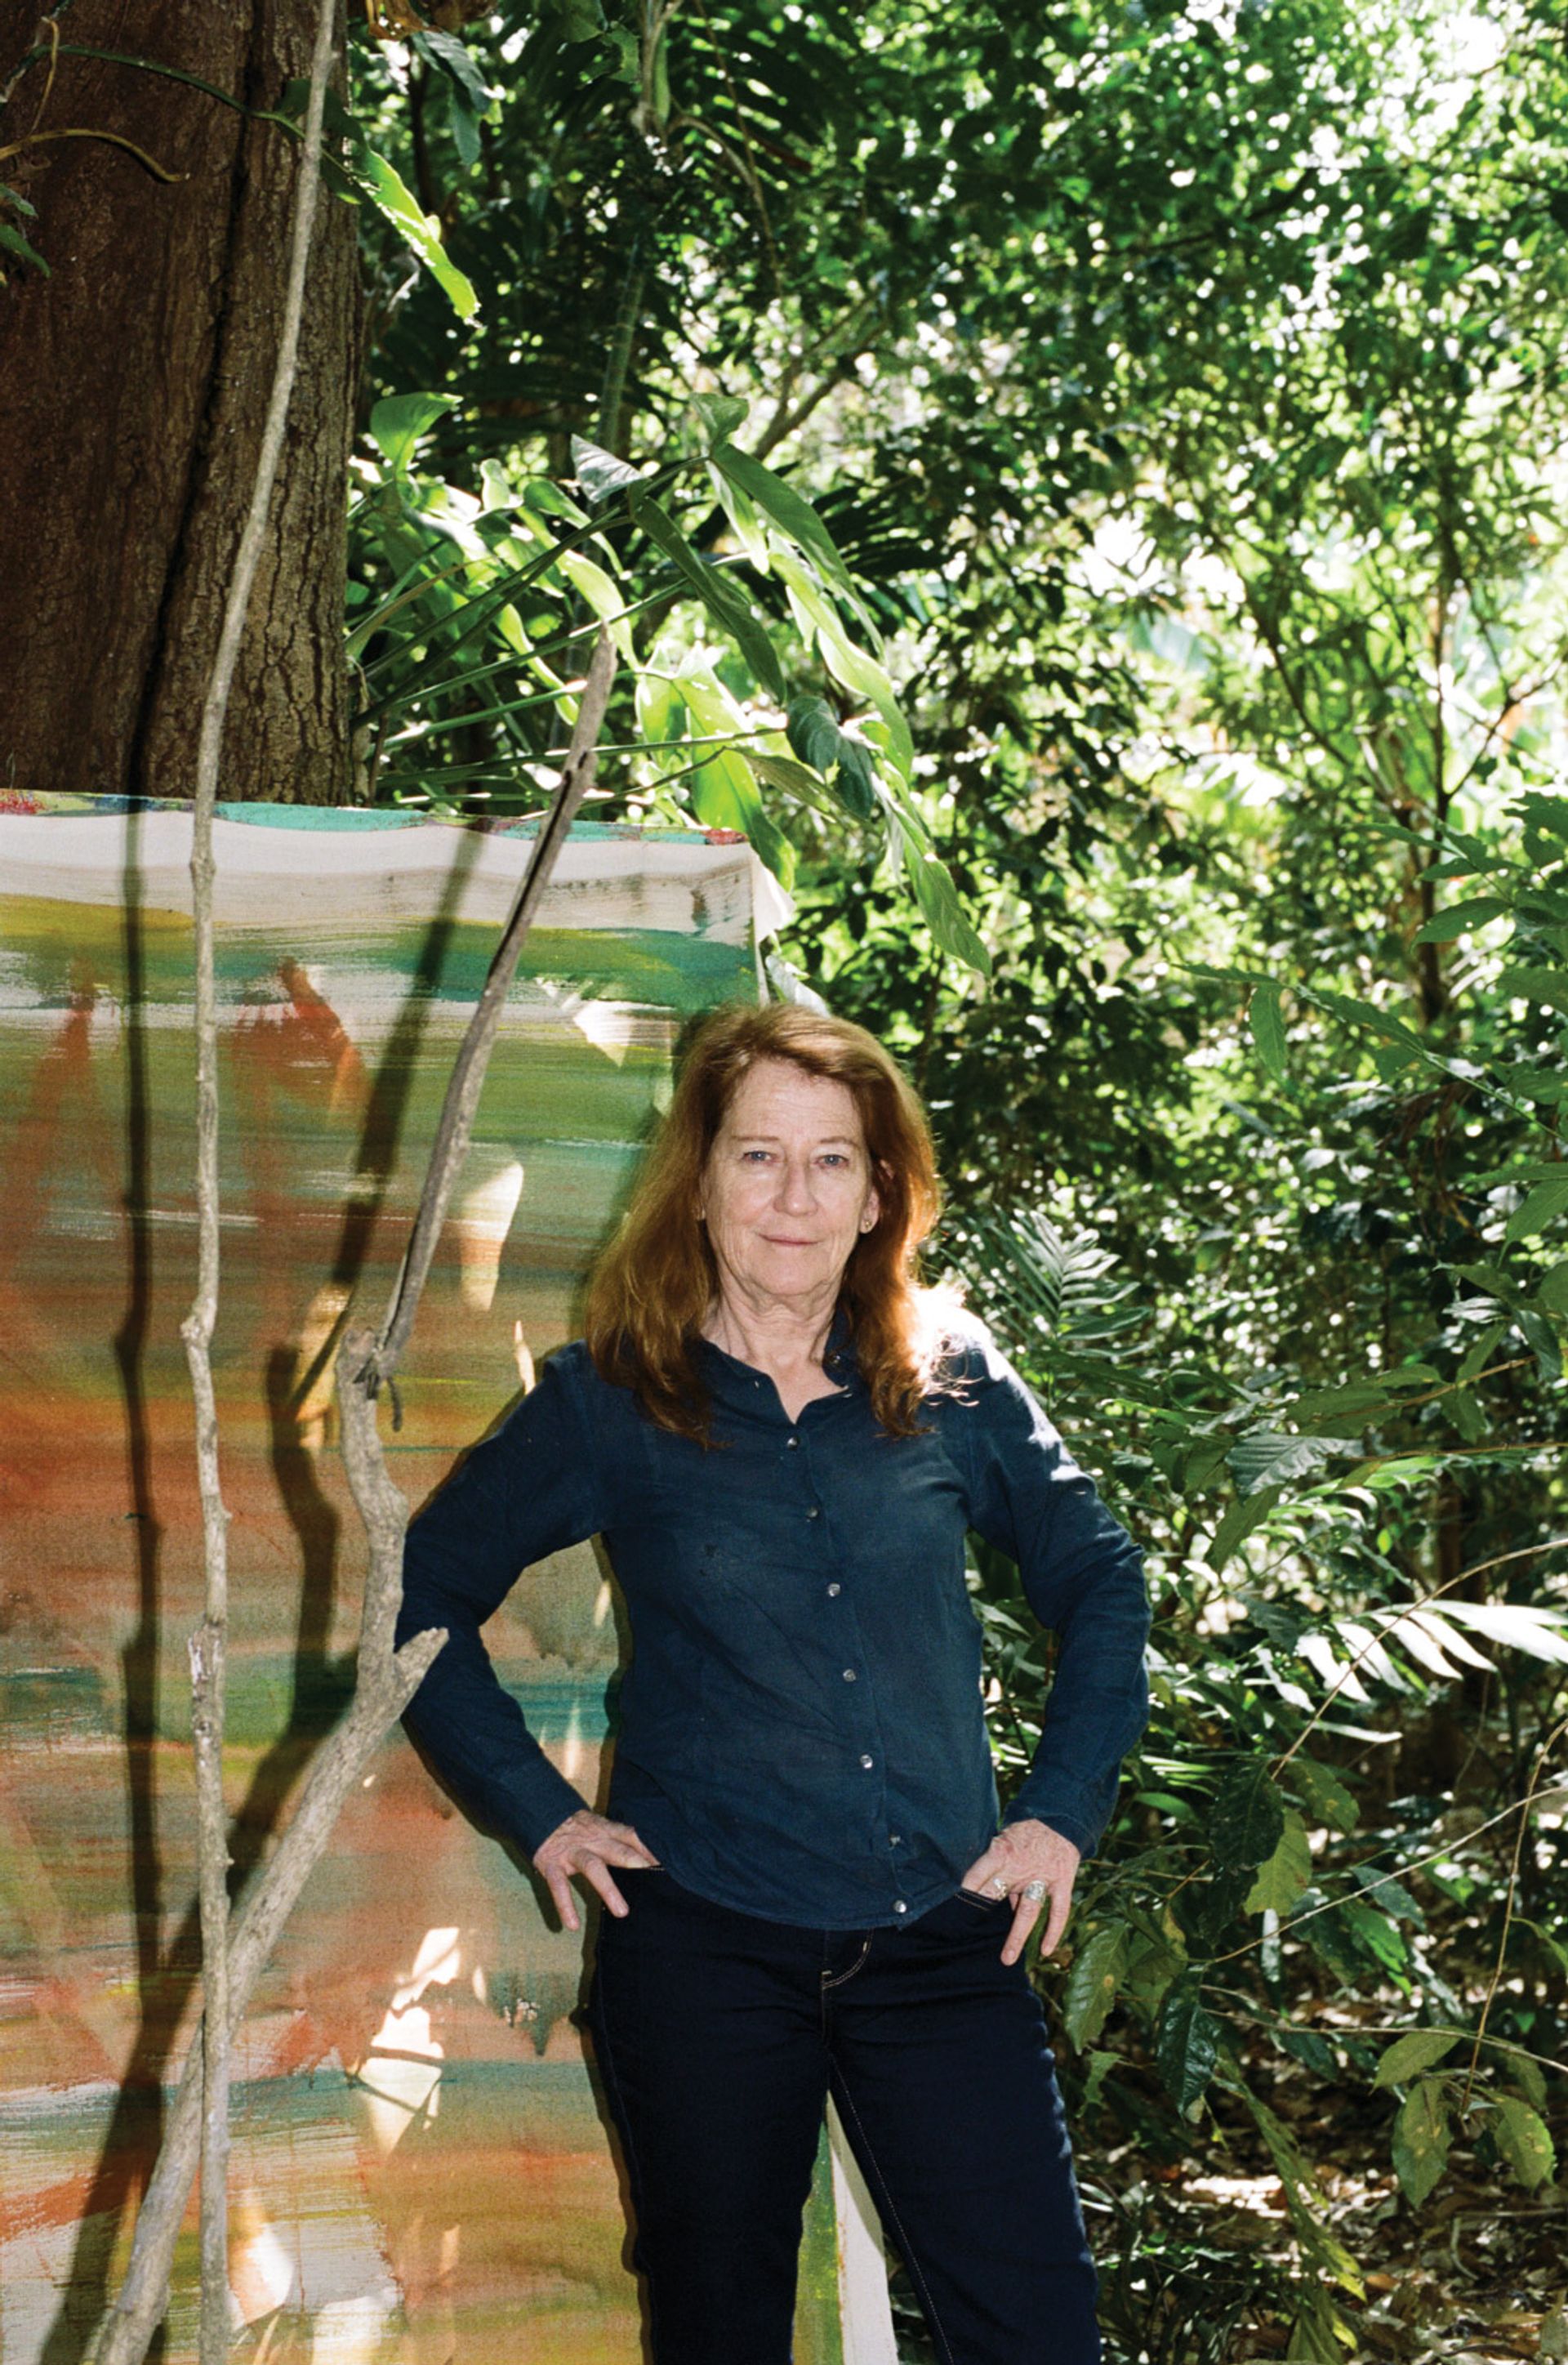 Vivian Suter prefers to paint outside, in her open studio in a small town in Guatemala. Exposing her paintings to the elements while she works is all part of her process. “It is important to be outside so that when I am making my work, it absorbs its surroundings,” she says © Flavio Karrer; courtesy of Gladstone Gallery and Karma International